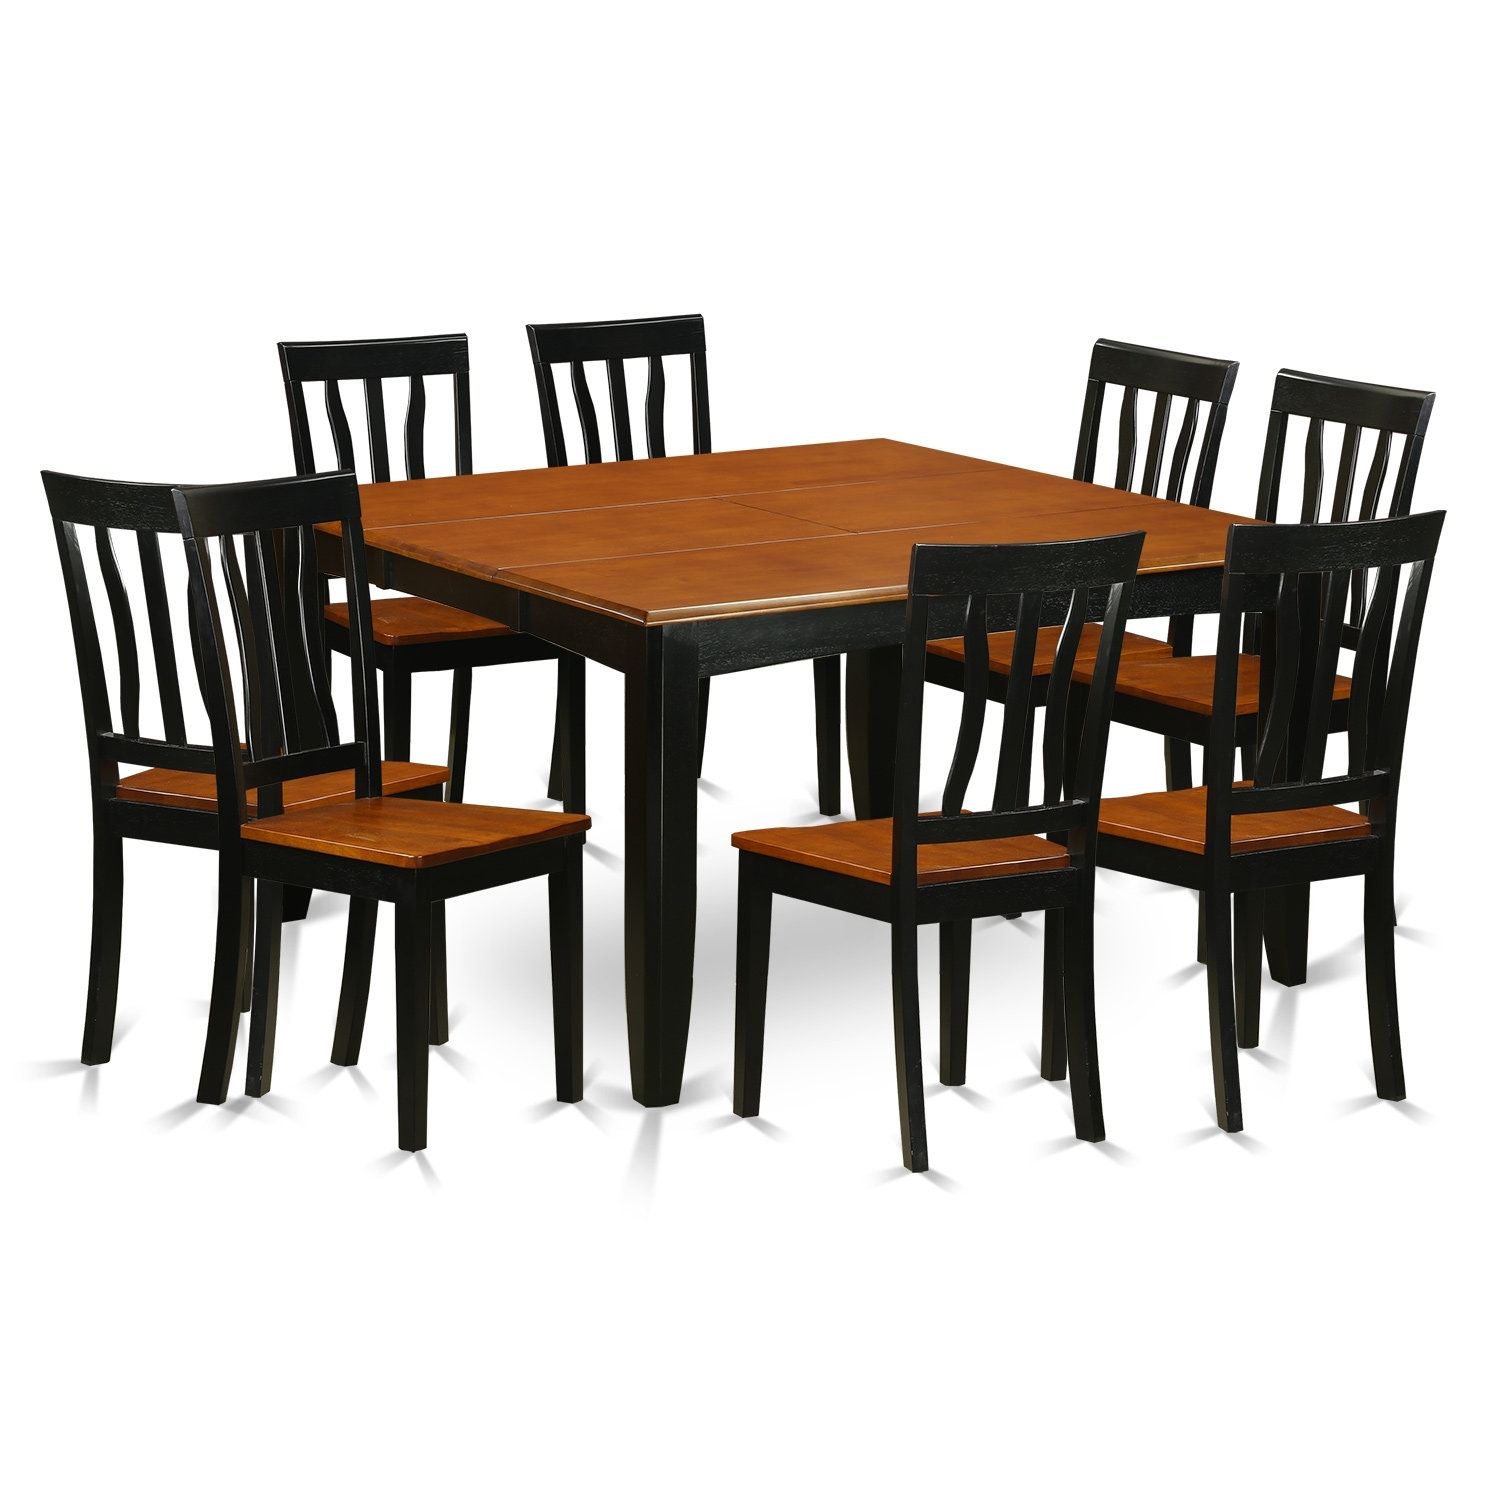 Wooden Importers Parfait 9 Piece Dining Set | Wayfair Within Newest Craftsman 9 Piece Extension Dining Sets (View 8 of 20)